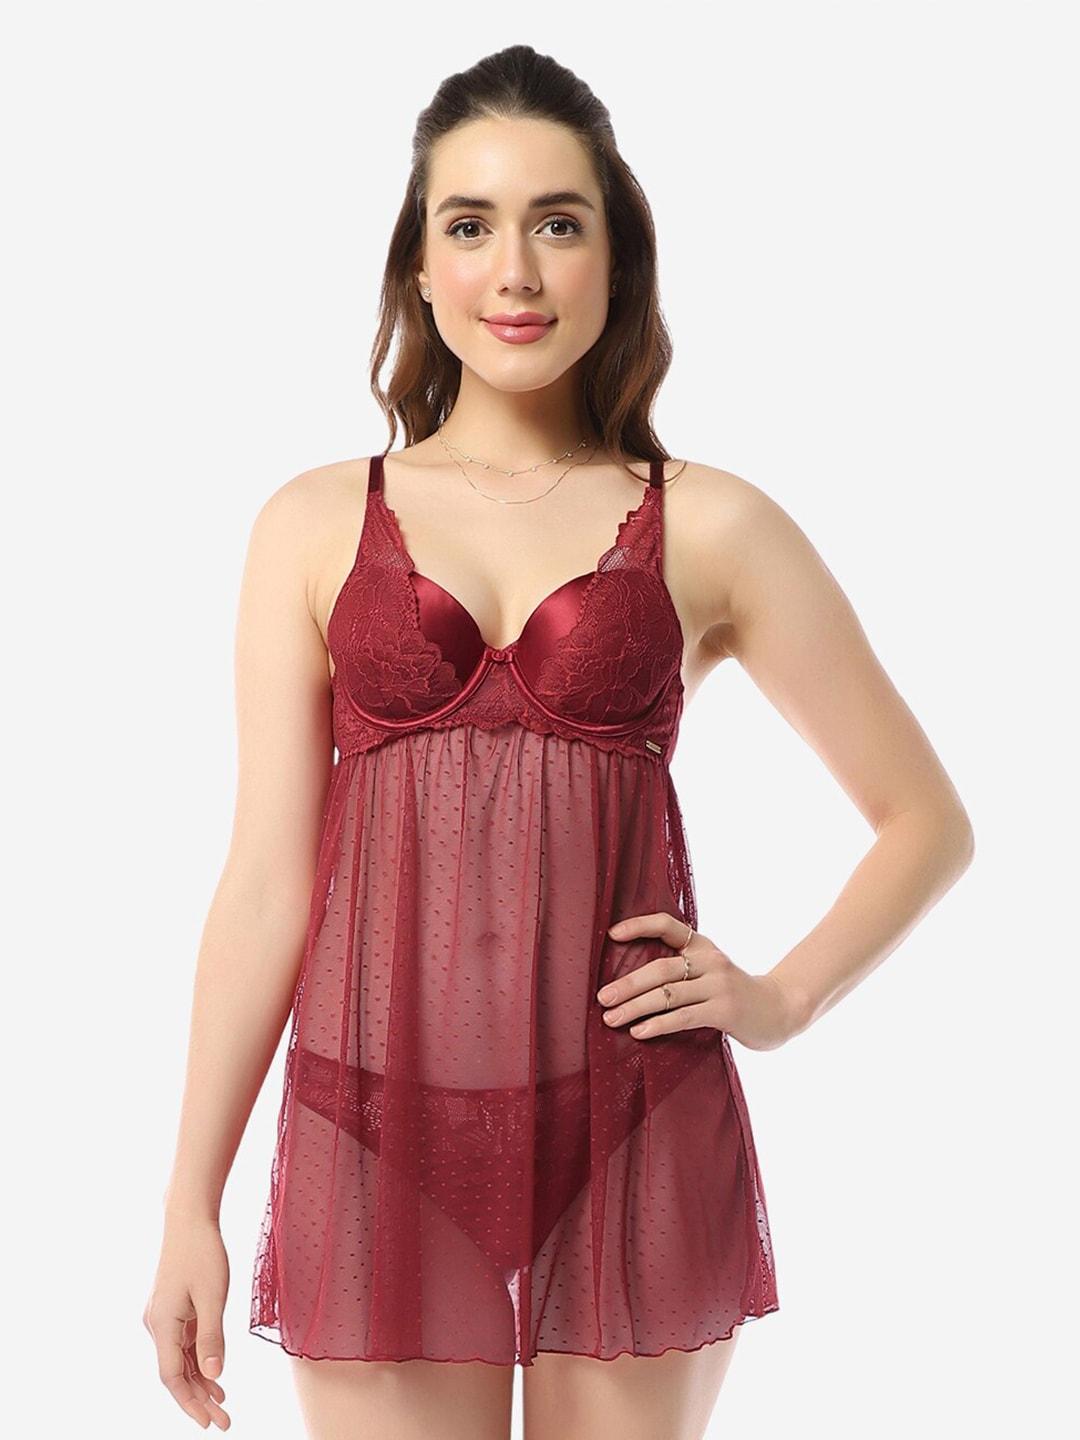 Amante Self Design Lace Padded Shoulder Straps Baby Doll